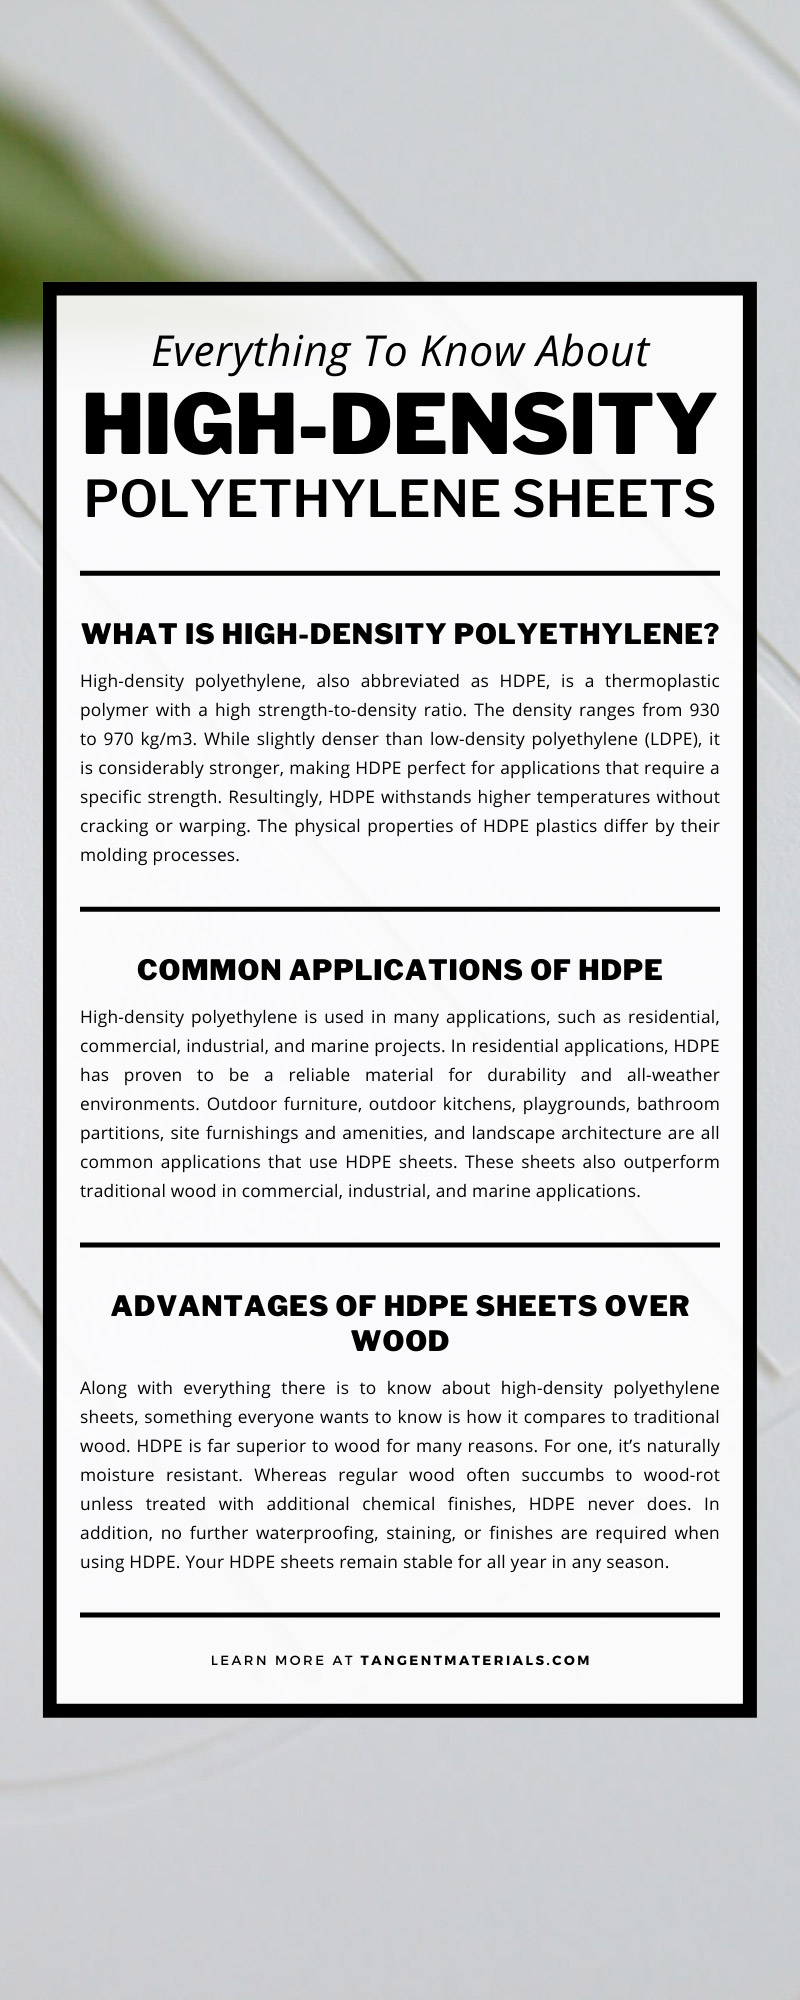 Everything To Know About High-Density Polyethylene Sheets